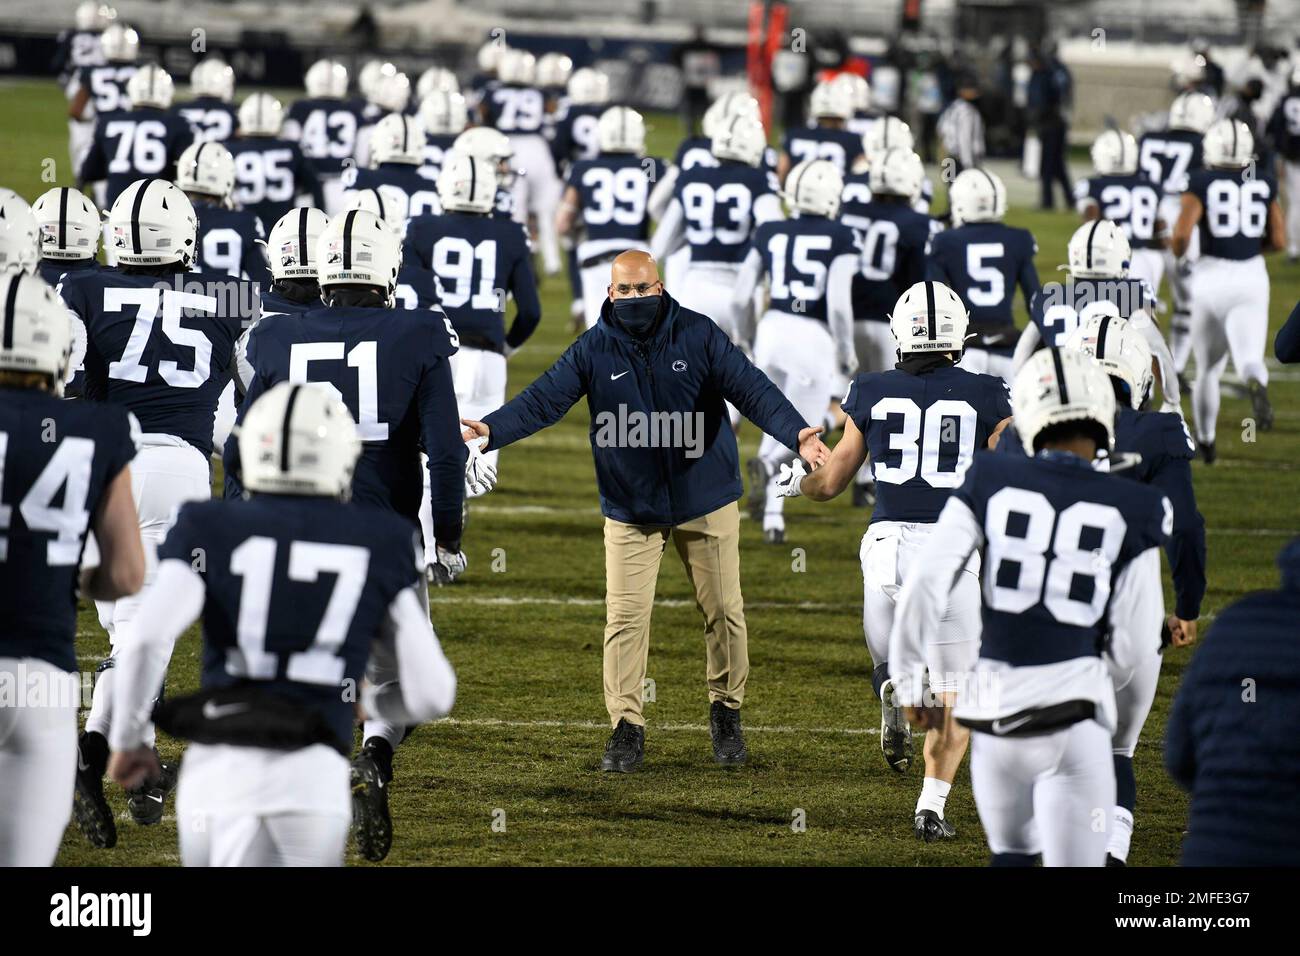 Penn State head coach James Franklin greets his team as they take the field for an NCAA college football game against Illinois in State College, Pa., on Saturday, Dec. 19, 2020. (AP Photo/Barry Reeger) Stock Photo